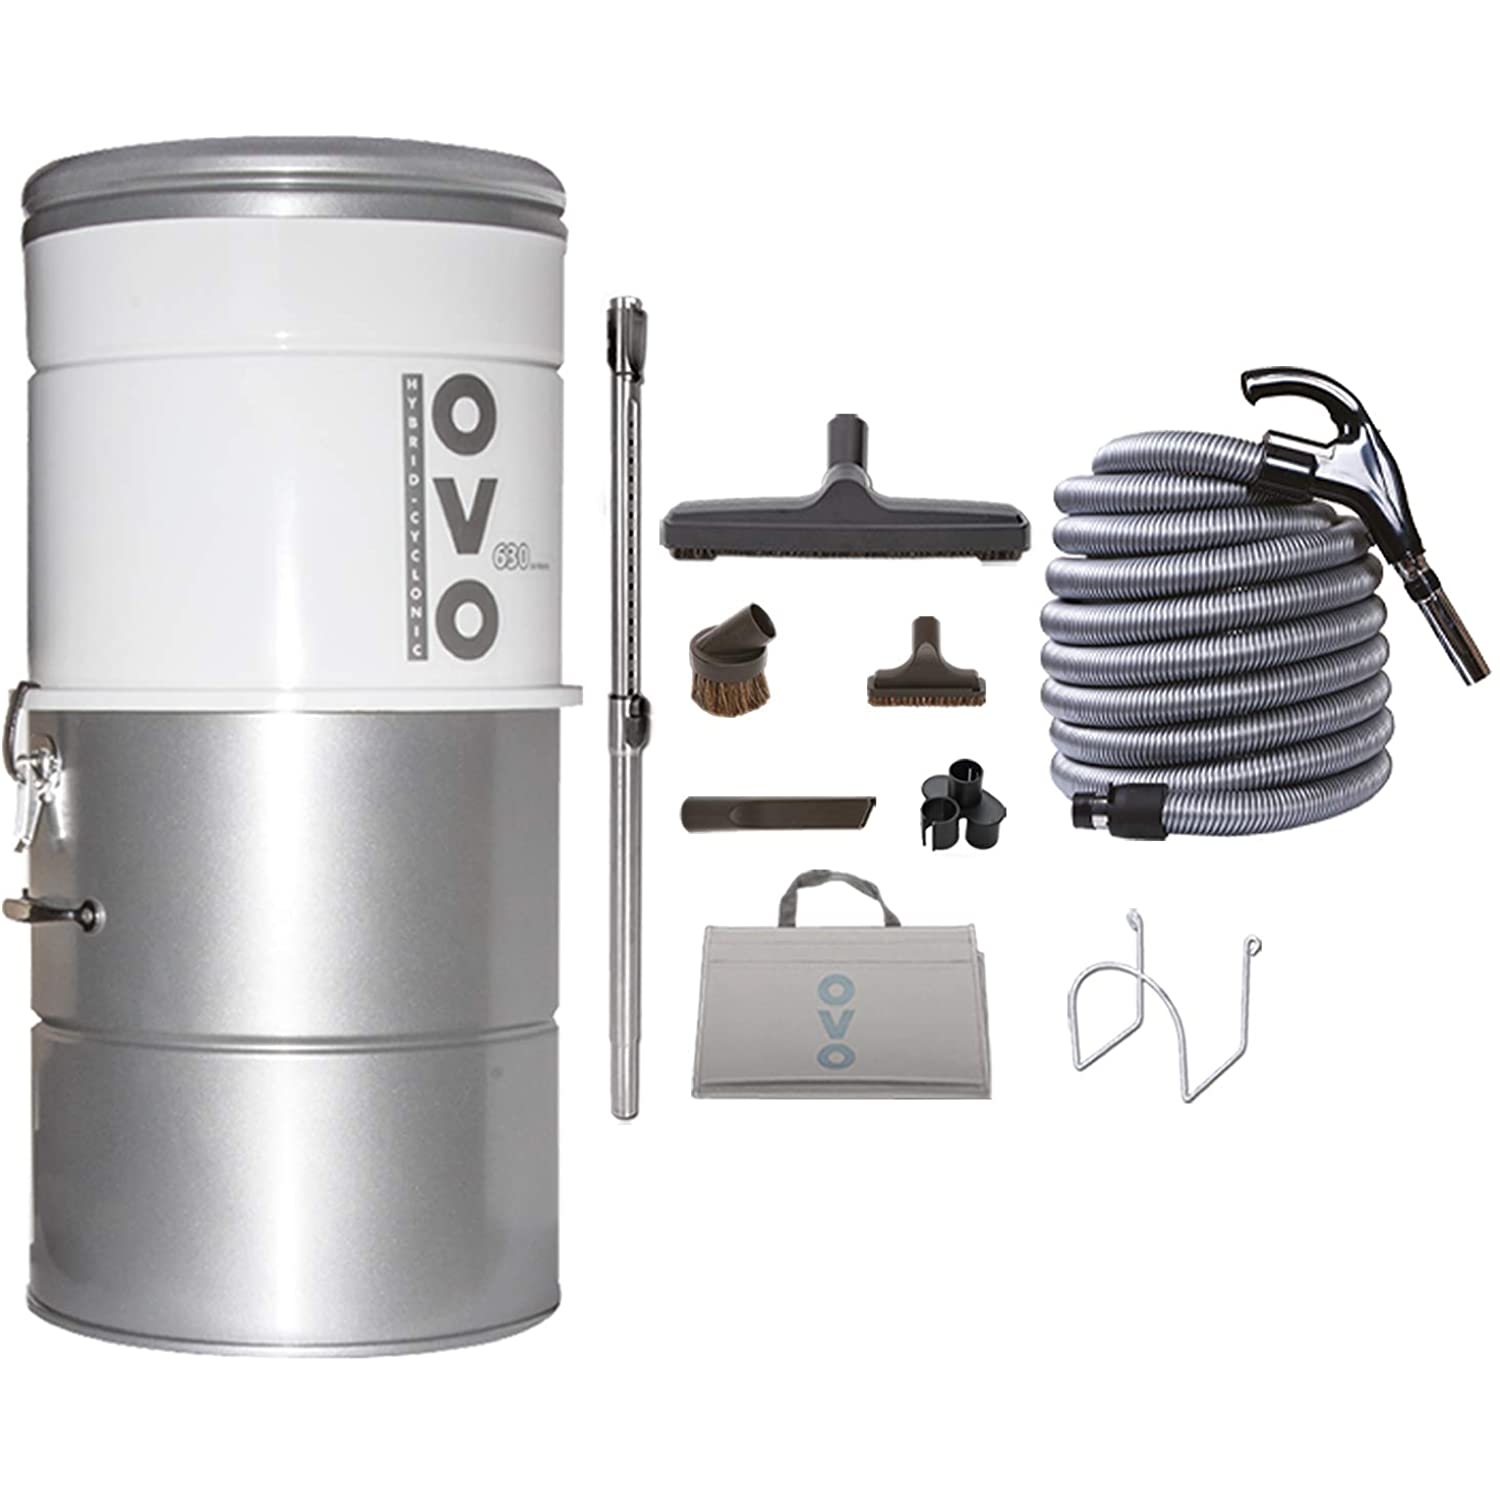 35ft with or Without Disposable Bags 25L or 6.6 Gal Sliver Hybrid Filtration OVO PAK63D-35 Large and Powerful Central Vacuum System 630 Air watts with 35 ft Deluxe Accessory Kit Included